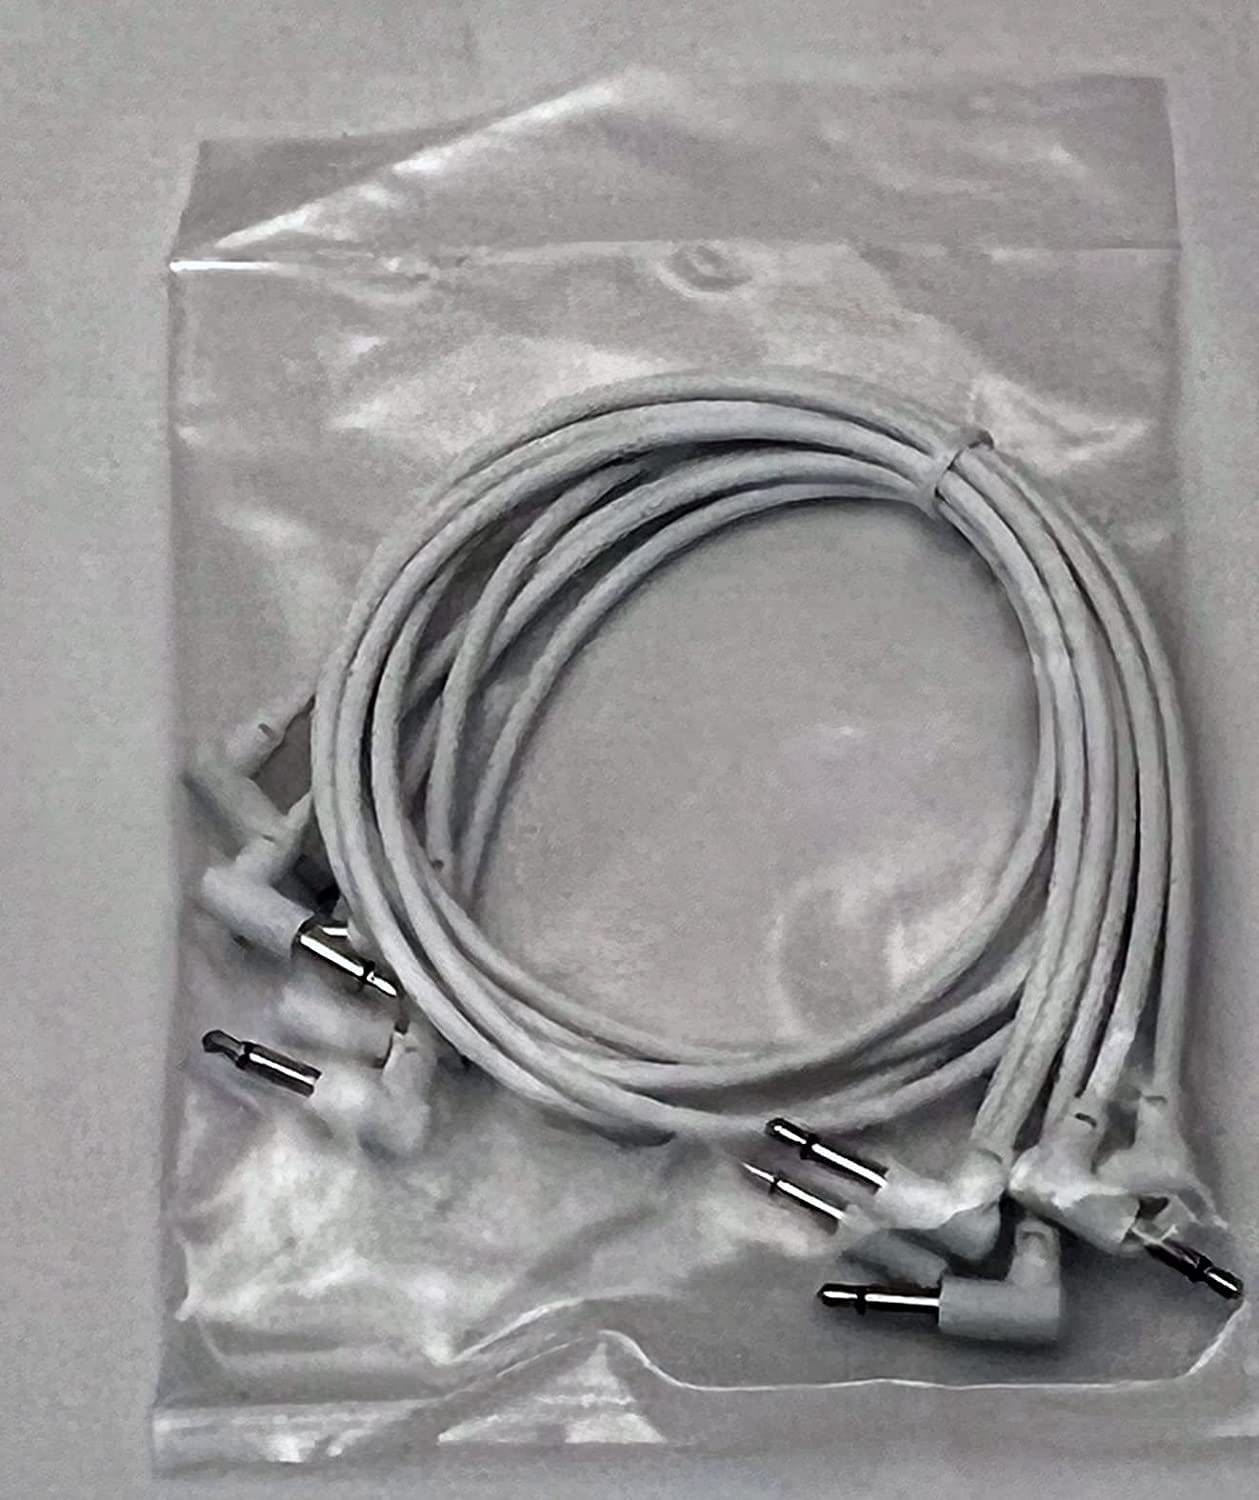 Luigis Modular M-PAR Right Angled Eurorack Patch Cables - Package of 5 White Cables, 18" (45 cm)